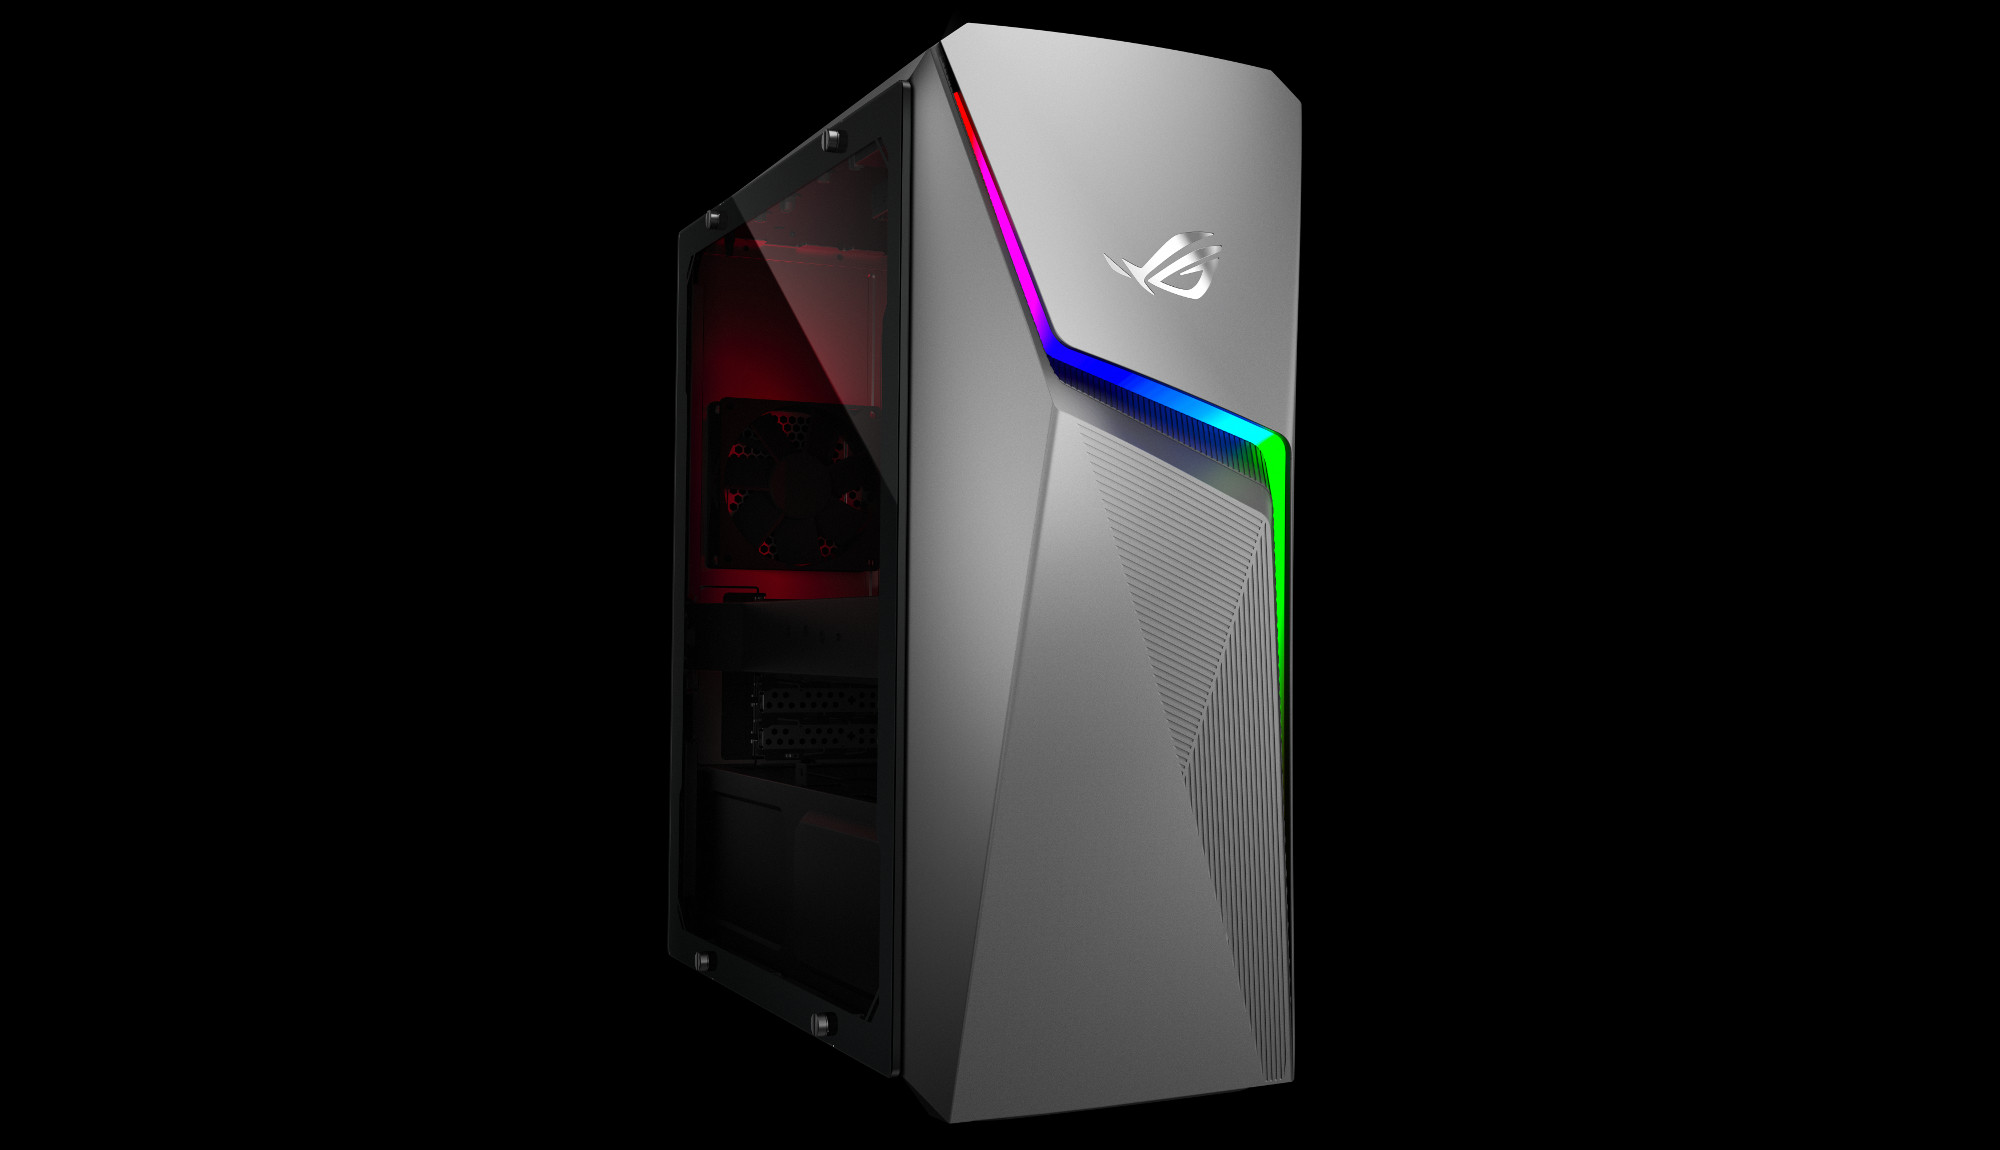 PC GAMER ROG STRIX Powered by Asus - sur